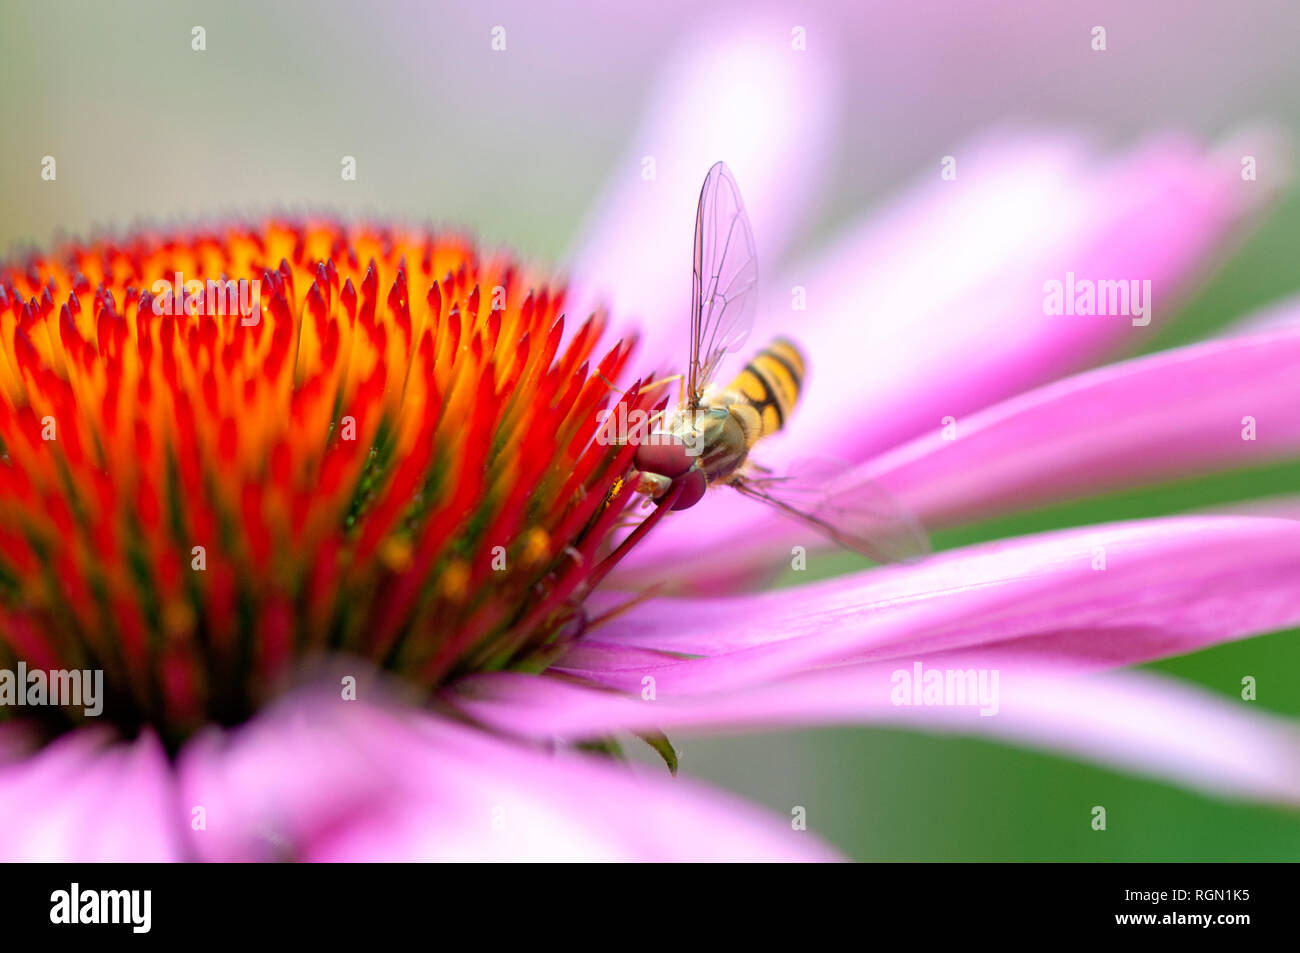 Close-up image of a Hover-fly collecting Pollen from a summer purple Coneflower, Echinacea purpurea Stock Photo